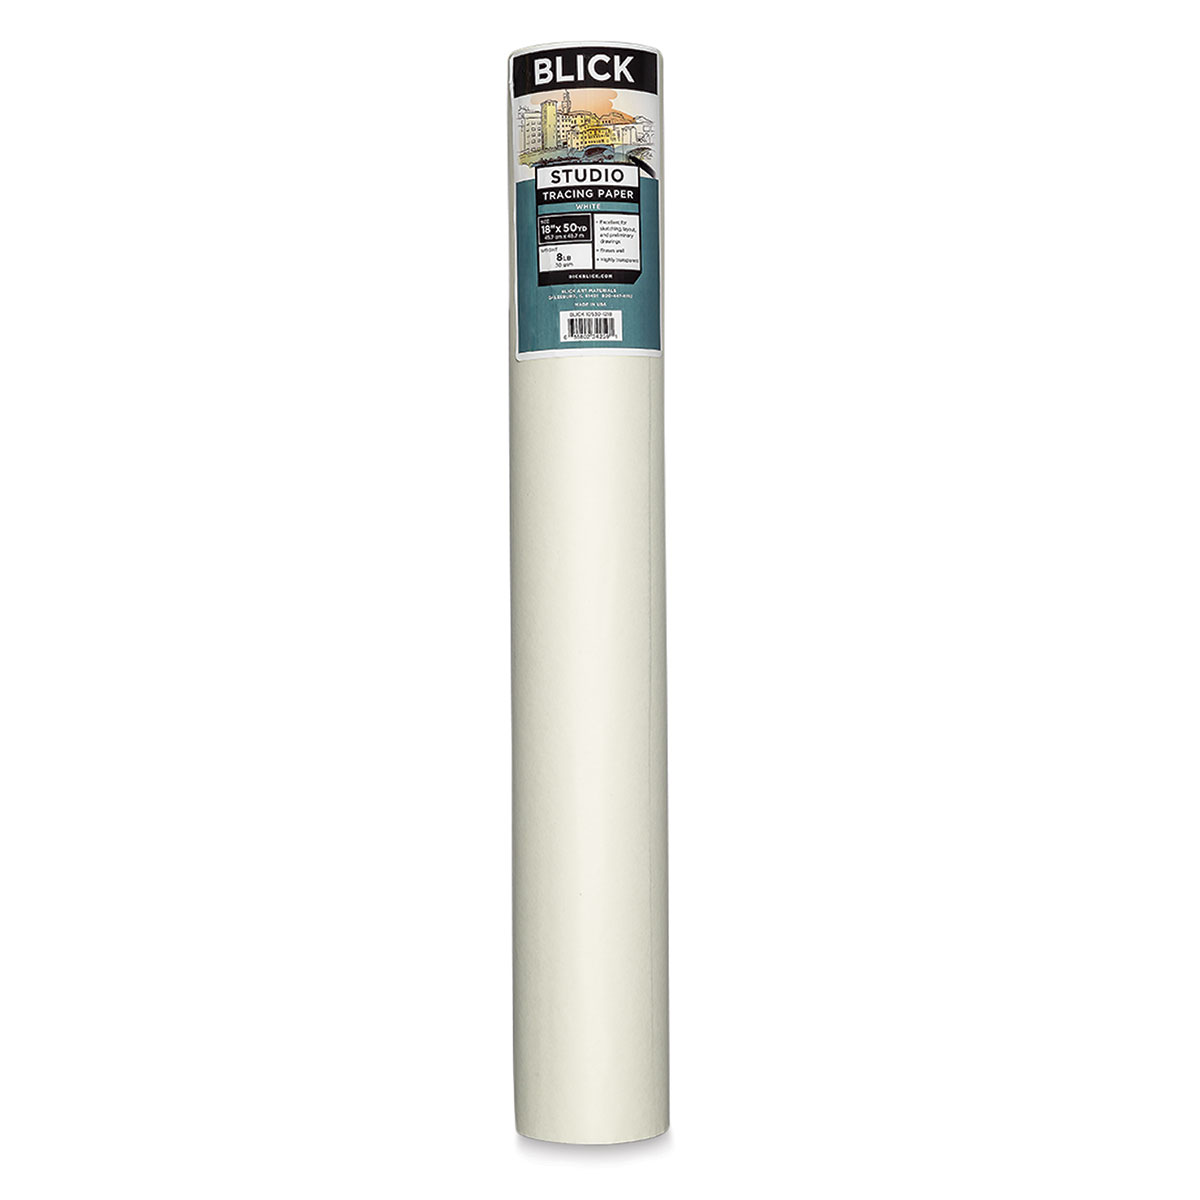 Blick Studio Tracing Paper Roll - 18 x 50 yds, White